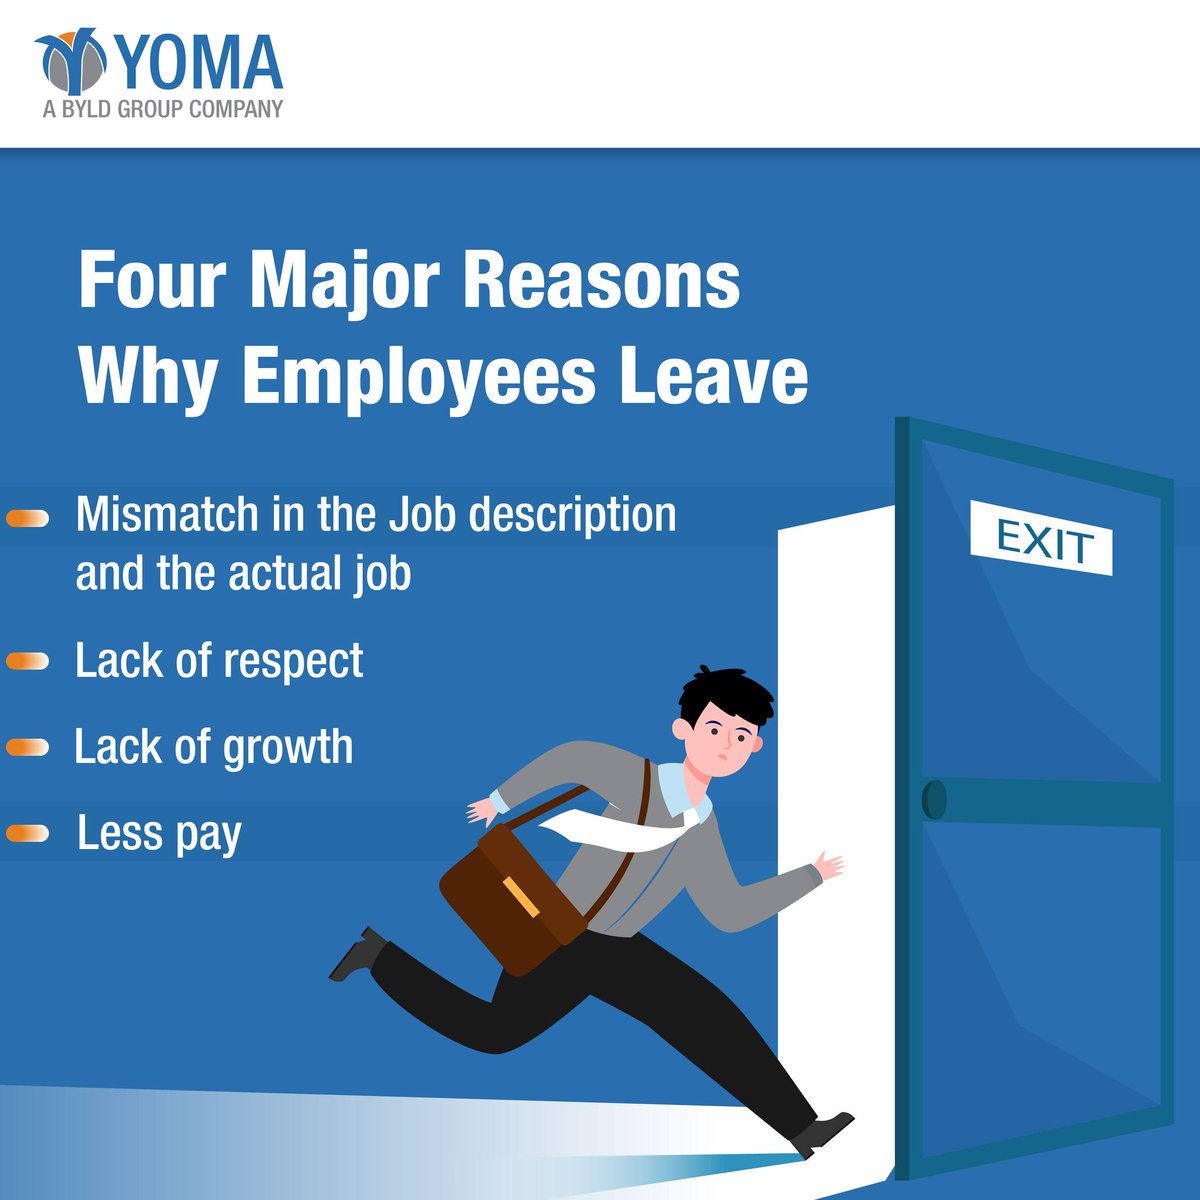 There are multiple reasons why employees might think about leaving your company and going for another job. Here are a few notable reasons for it.

#Yomabusiness #Yoma #employee #careerprogression #talentmanagement #humanresources
#hrmanagement #talentretention #employeexperience